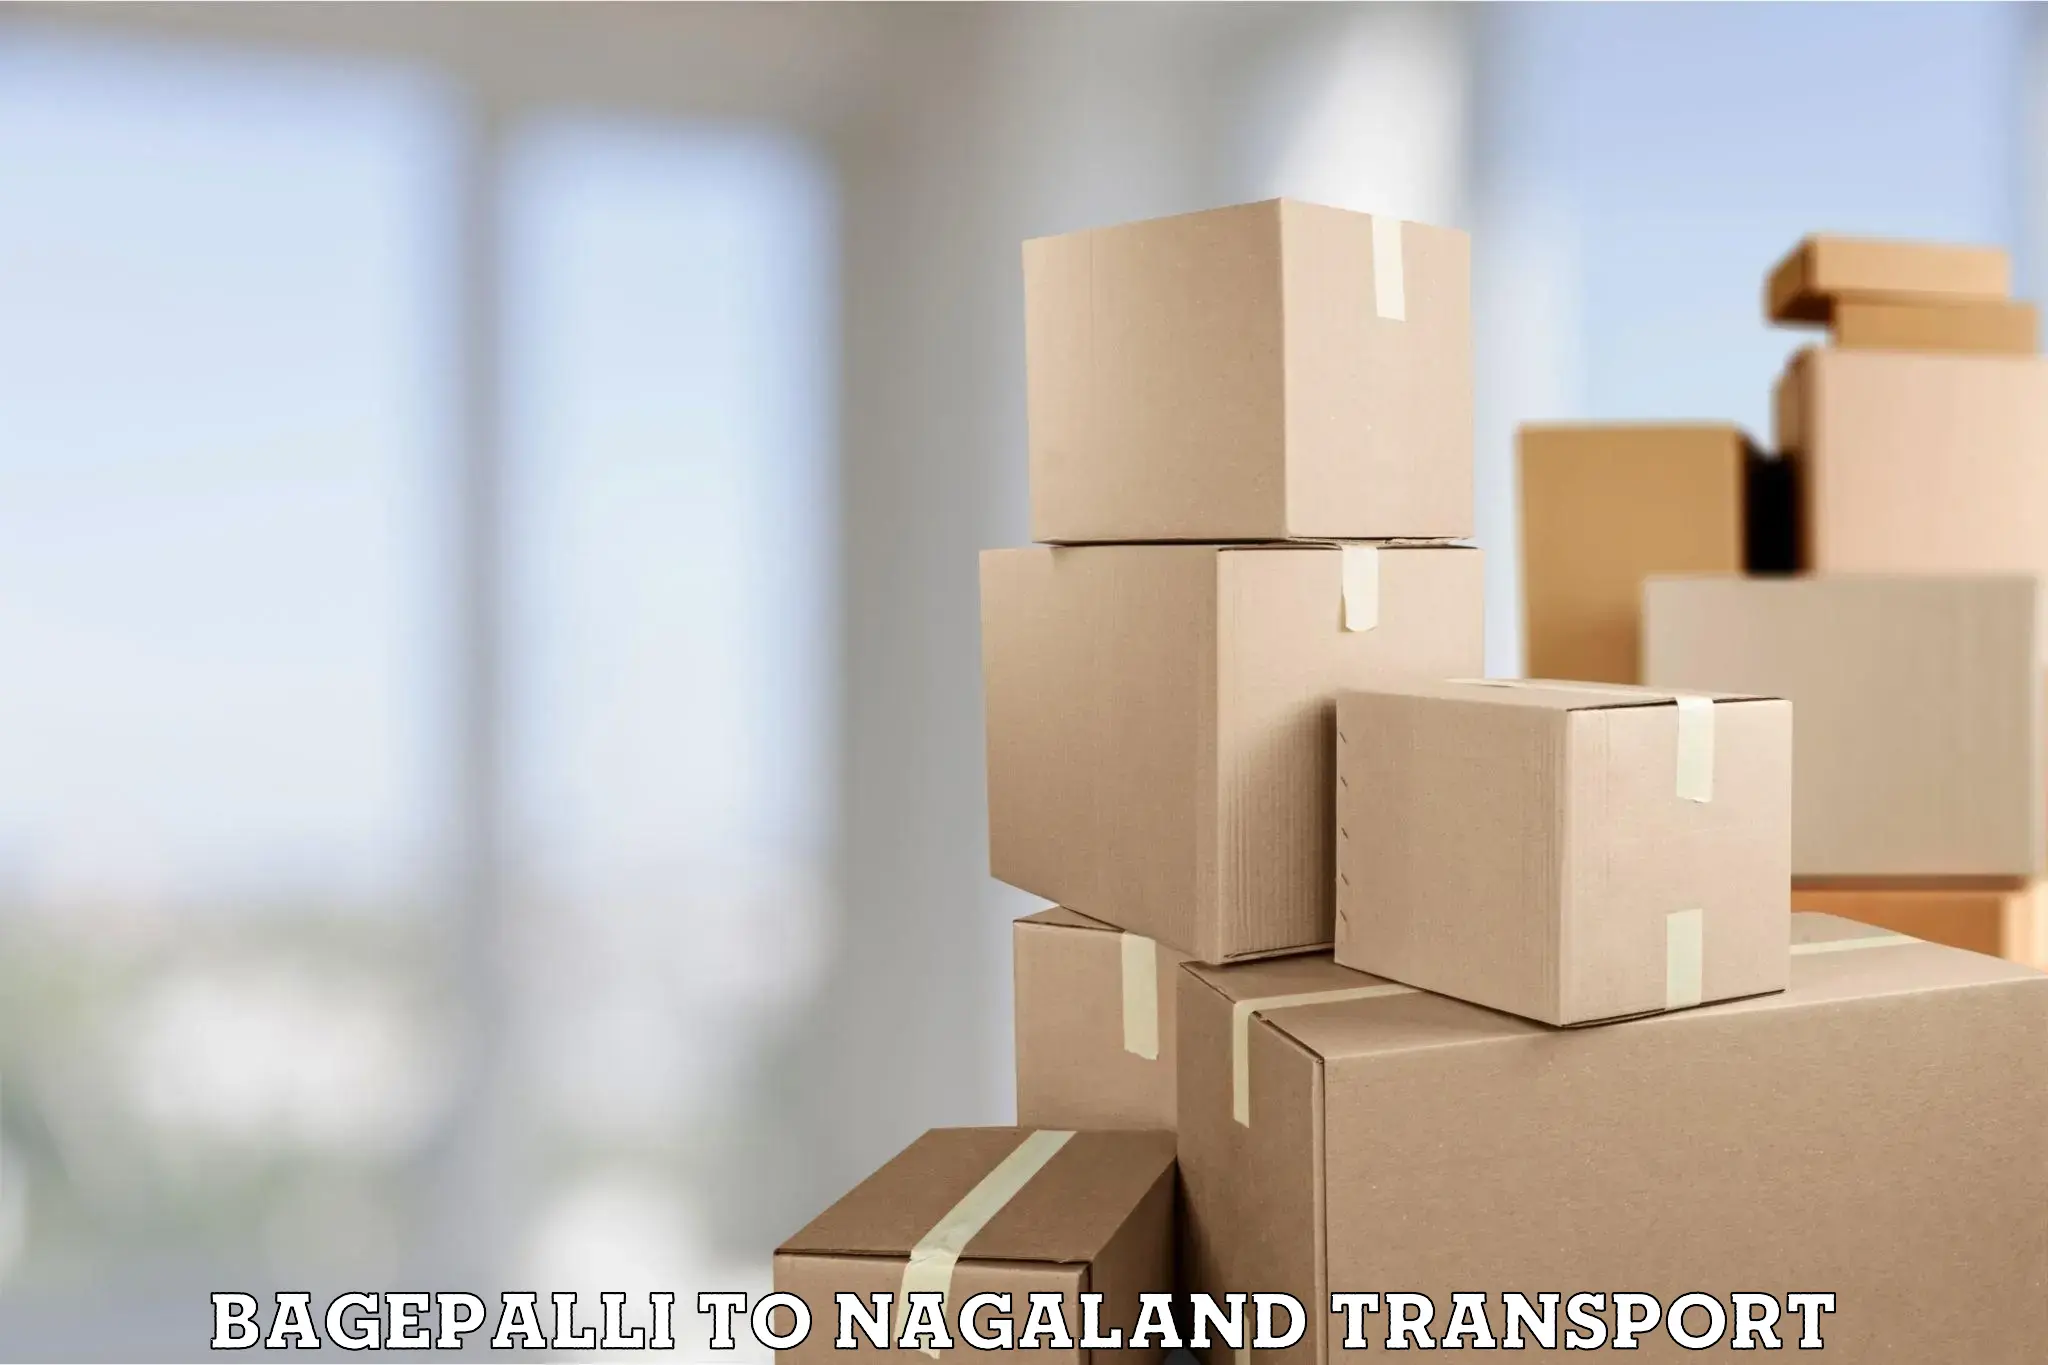 Transport in sharing Bagepalli to Nagaland